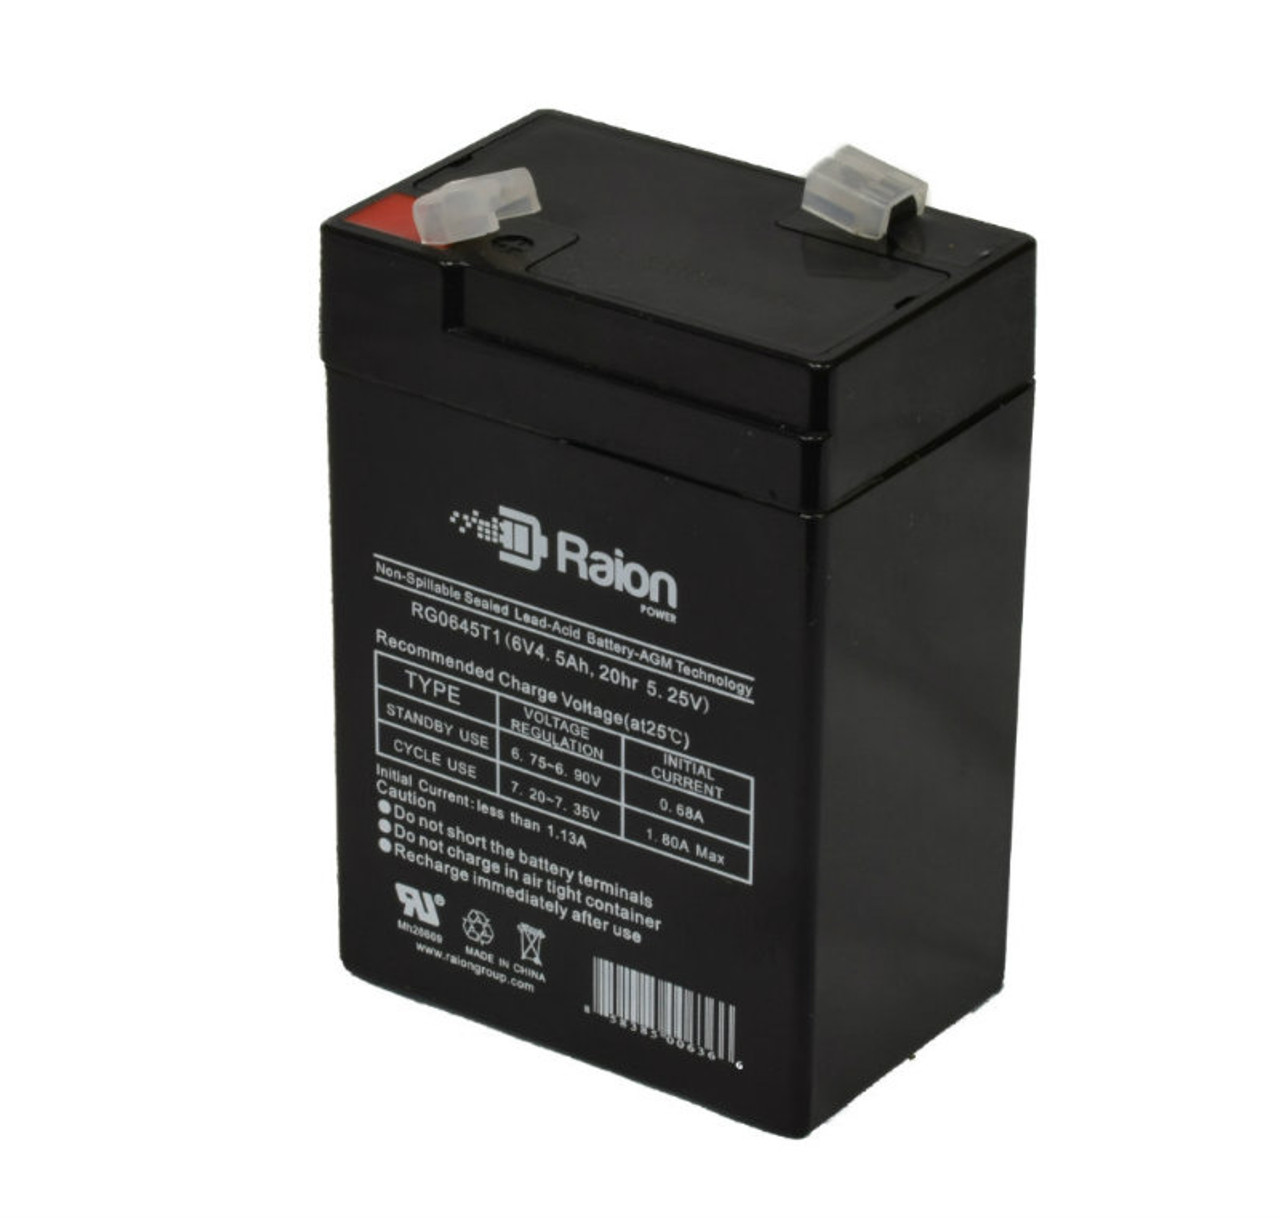 Raion Power RG0645T1 6V 4.5Ah Replacement Battery Cartridge for Edwards 1799-0108